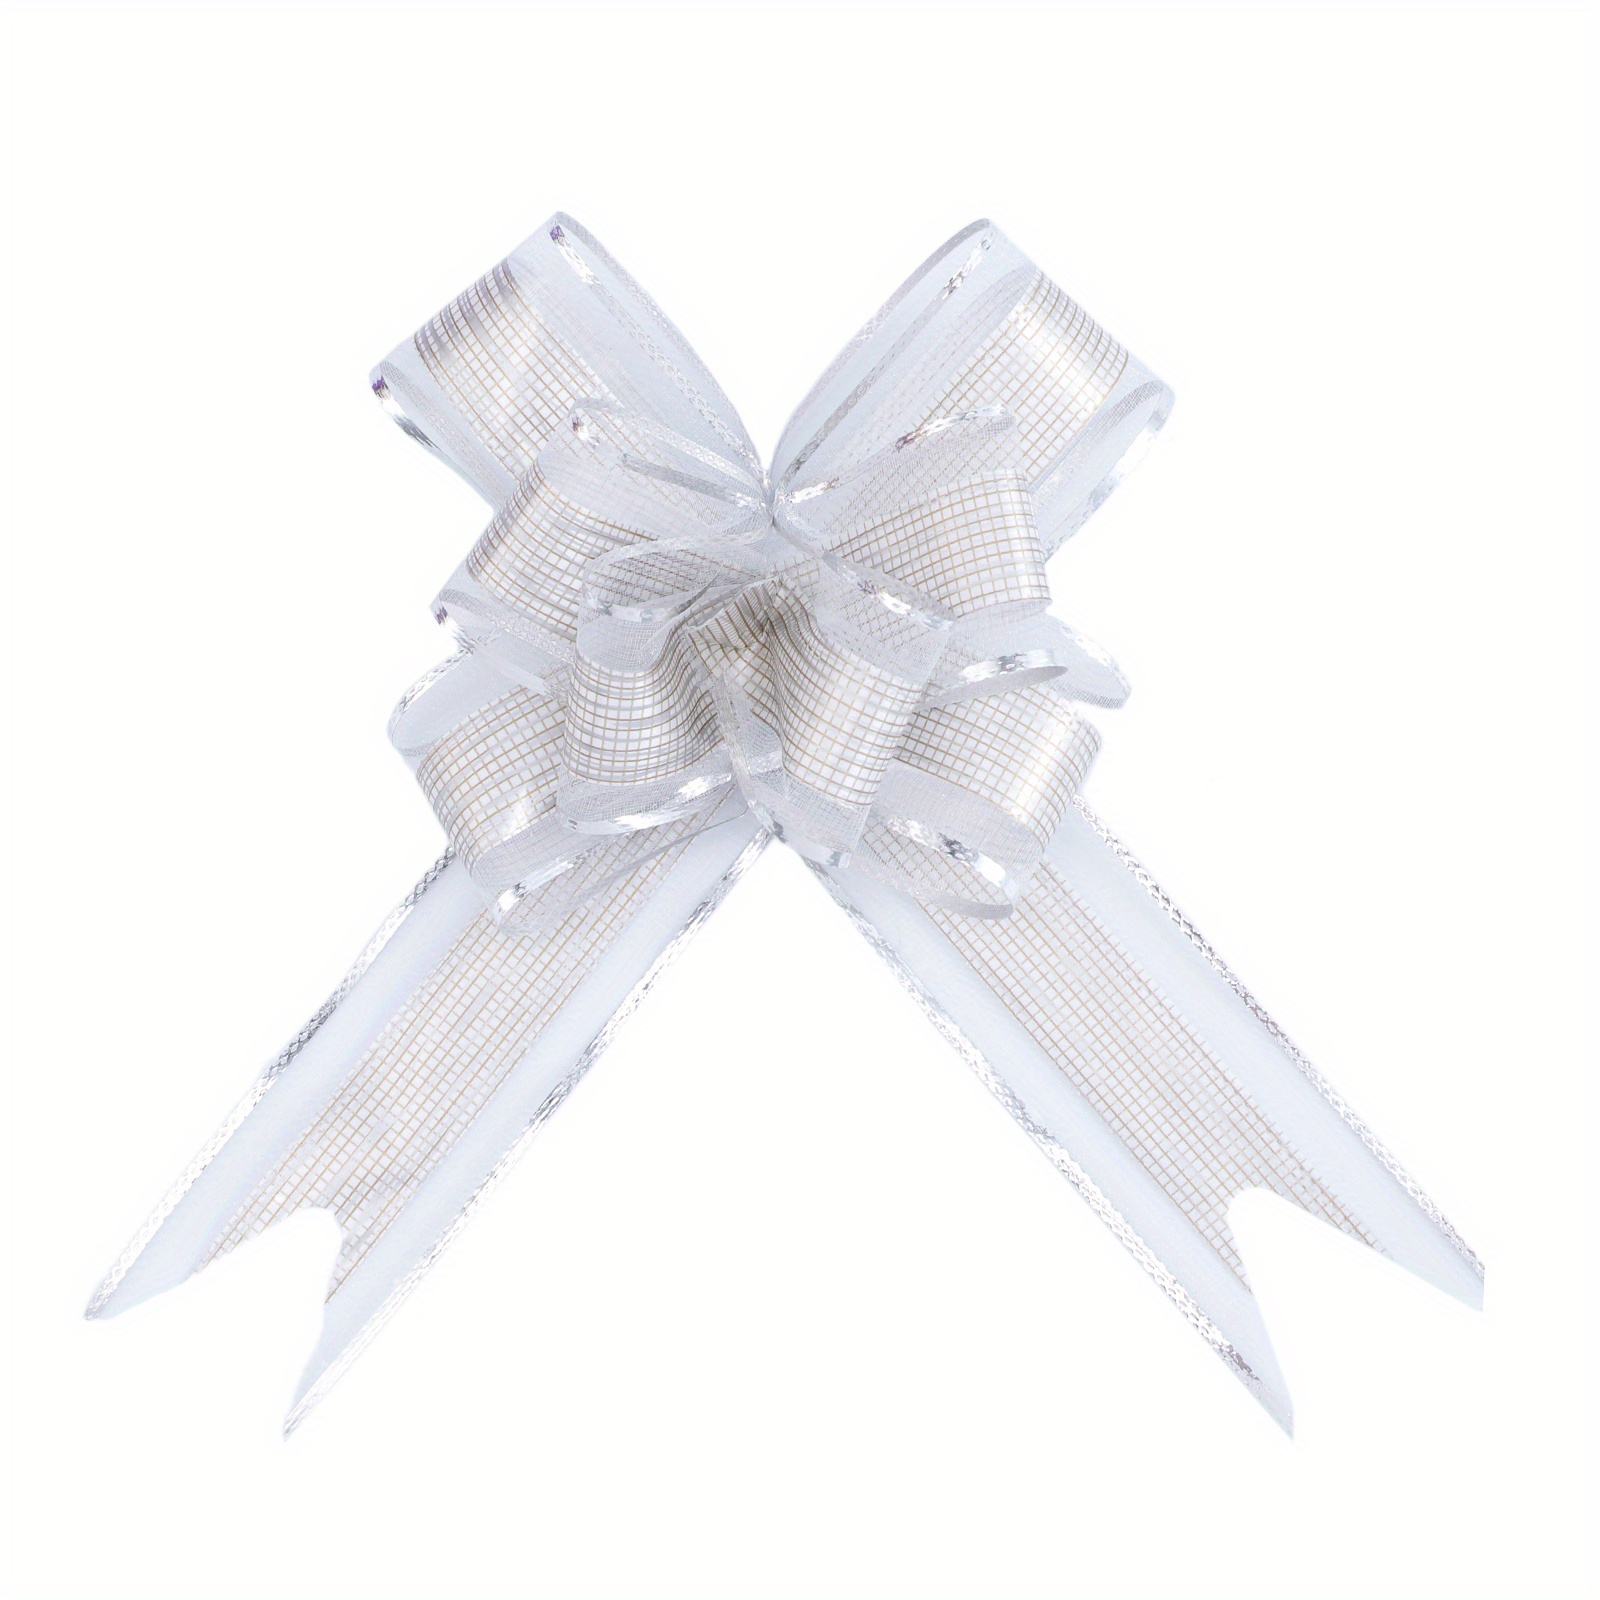 3 X Satin Ribbon Bows,white Bow, Silver Bow, Party Bow, Gift Wrapping Bow, Christmas  Bow, Decorative Bow, Self Adhesive Bow 